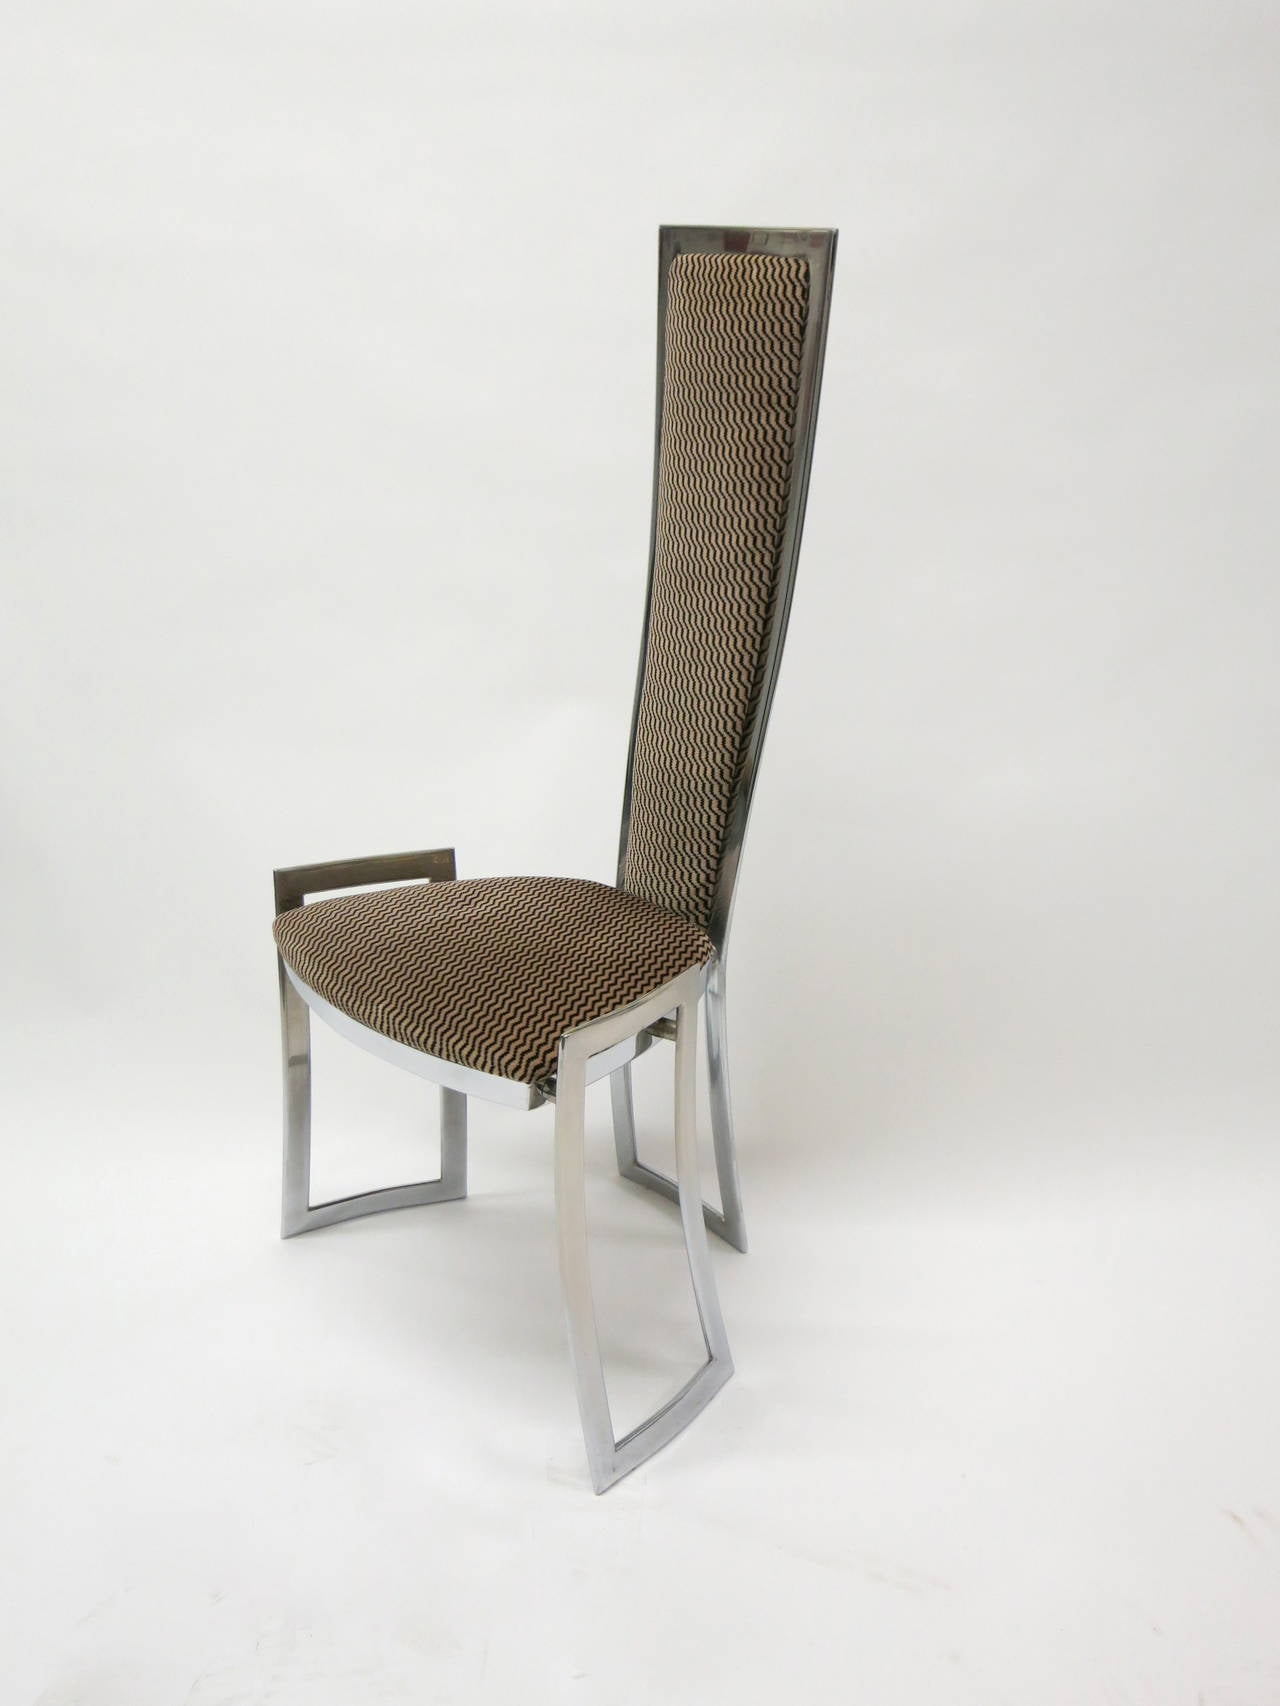 Set of 8 Dining chairs in with a polished steel frame with a rectangular support on each side and one in the back. The chairs are upholstered in a brown velvet fabric in very good condition.